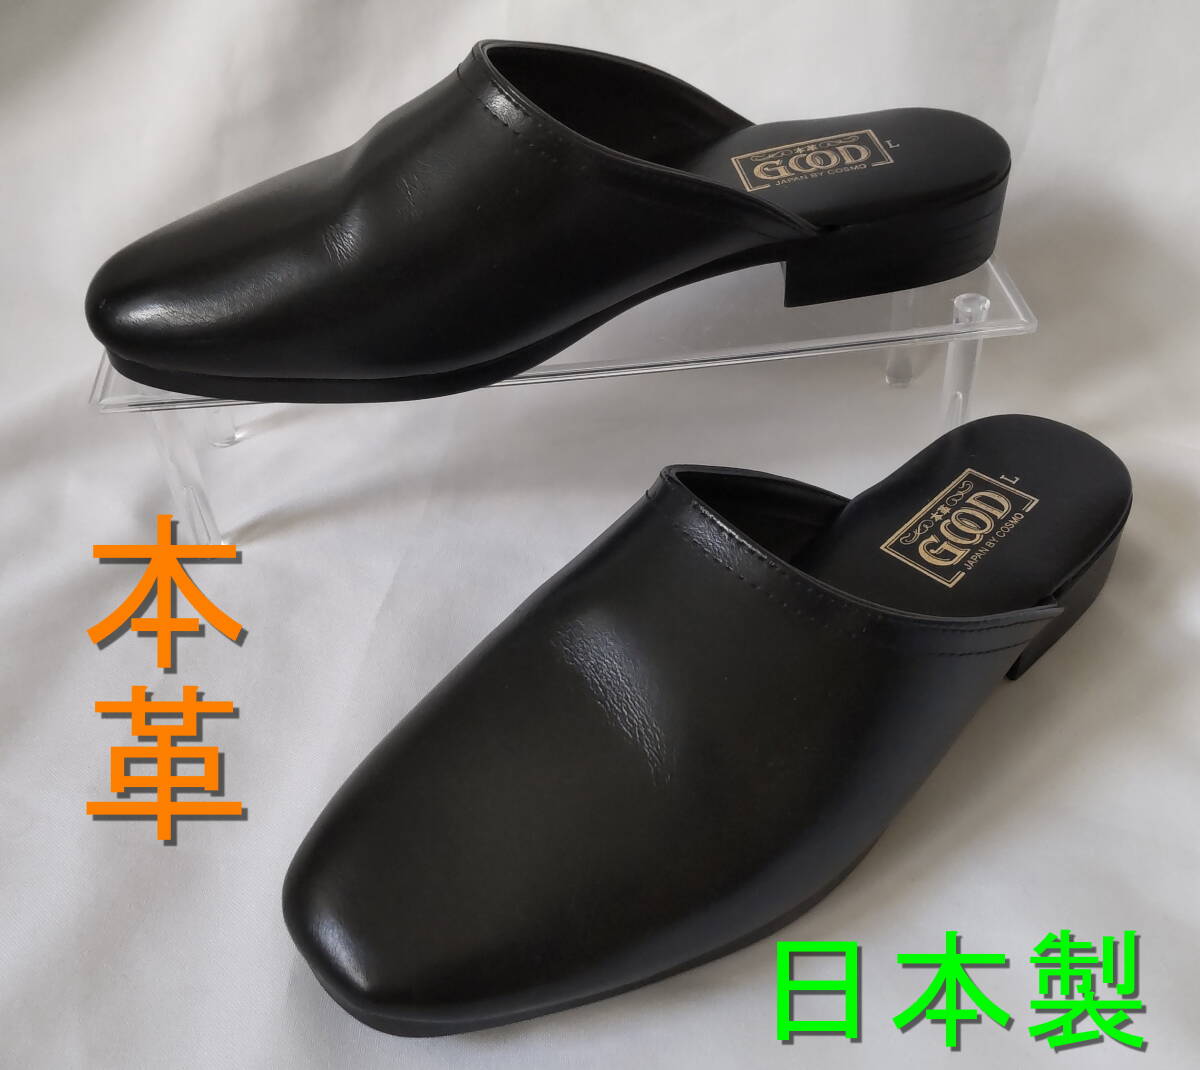  prompt decision possible made in Japan original leather sandals * slippers leather business sandals size L *JAPAN BY COSMO